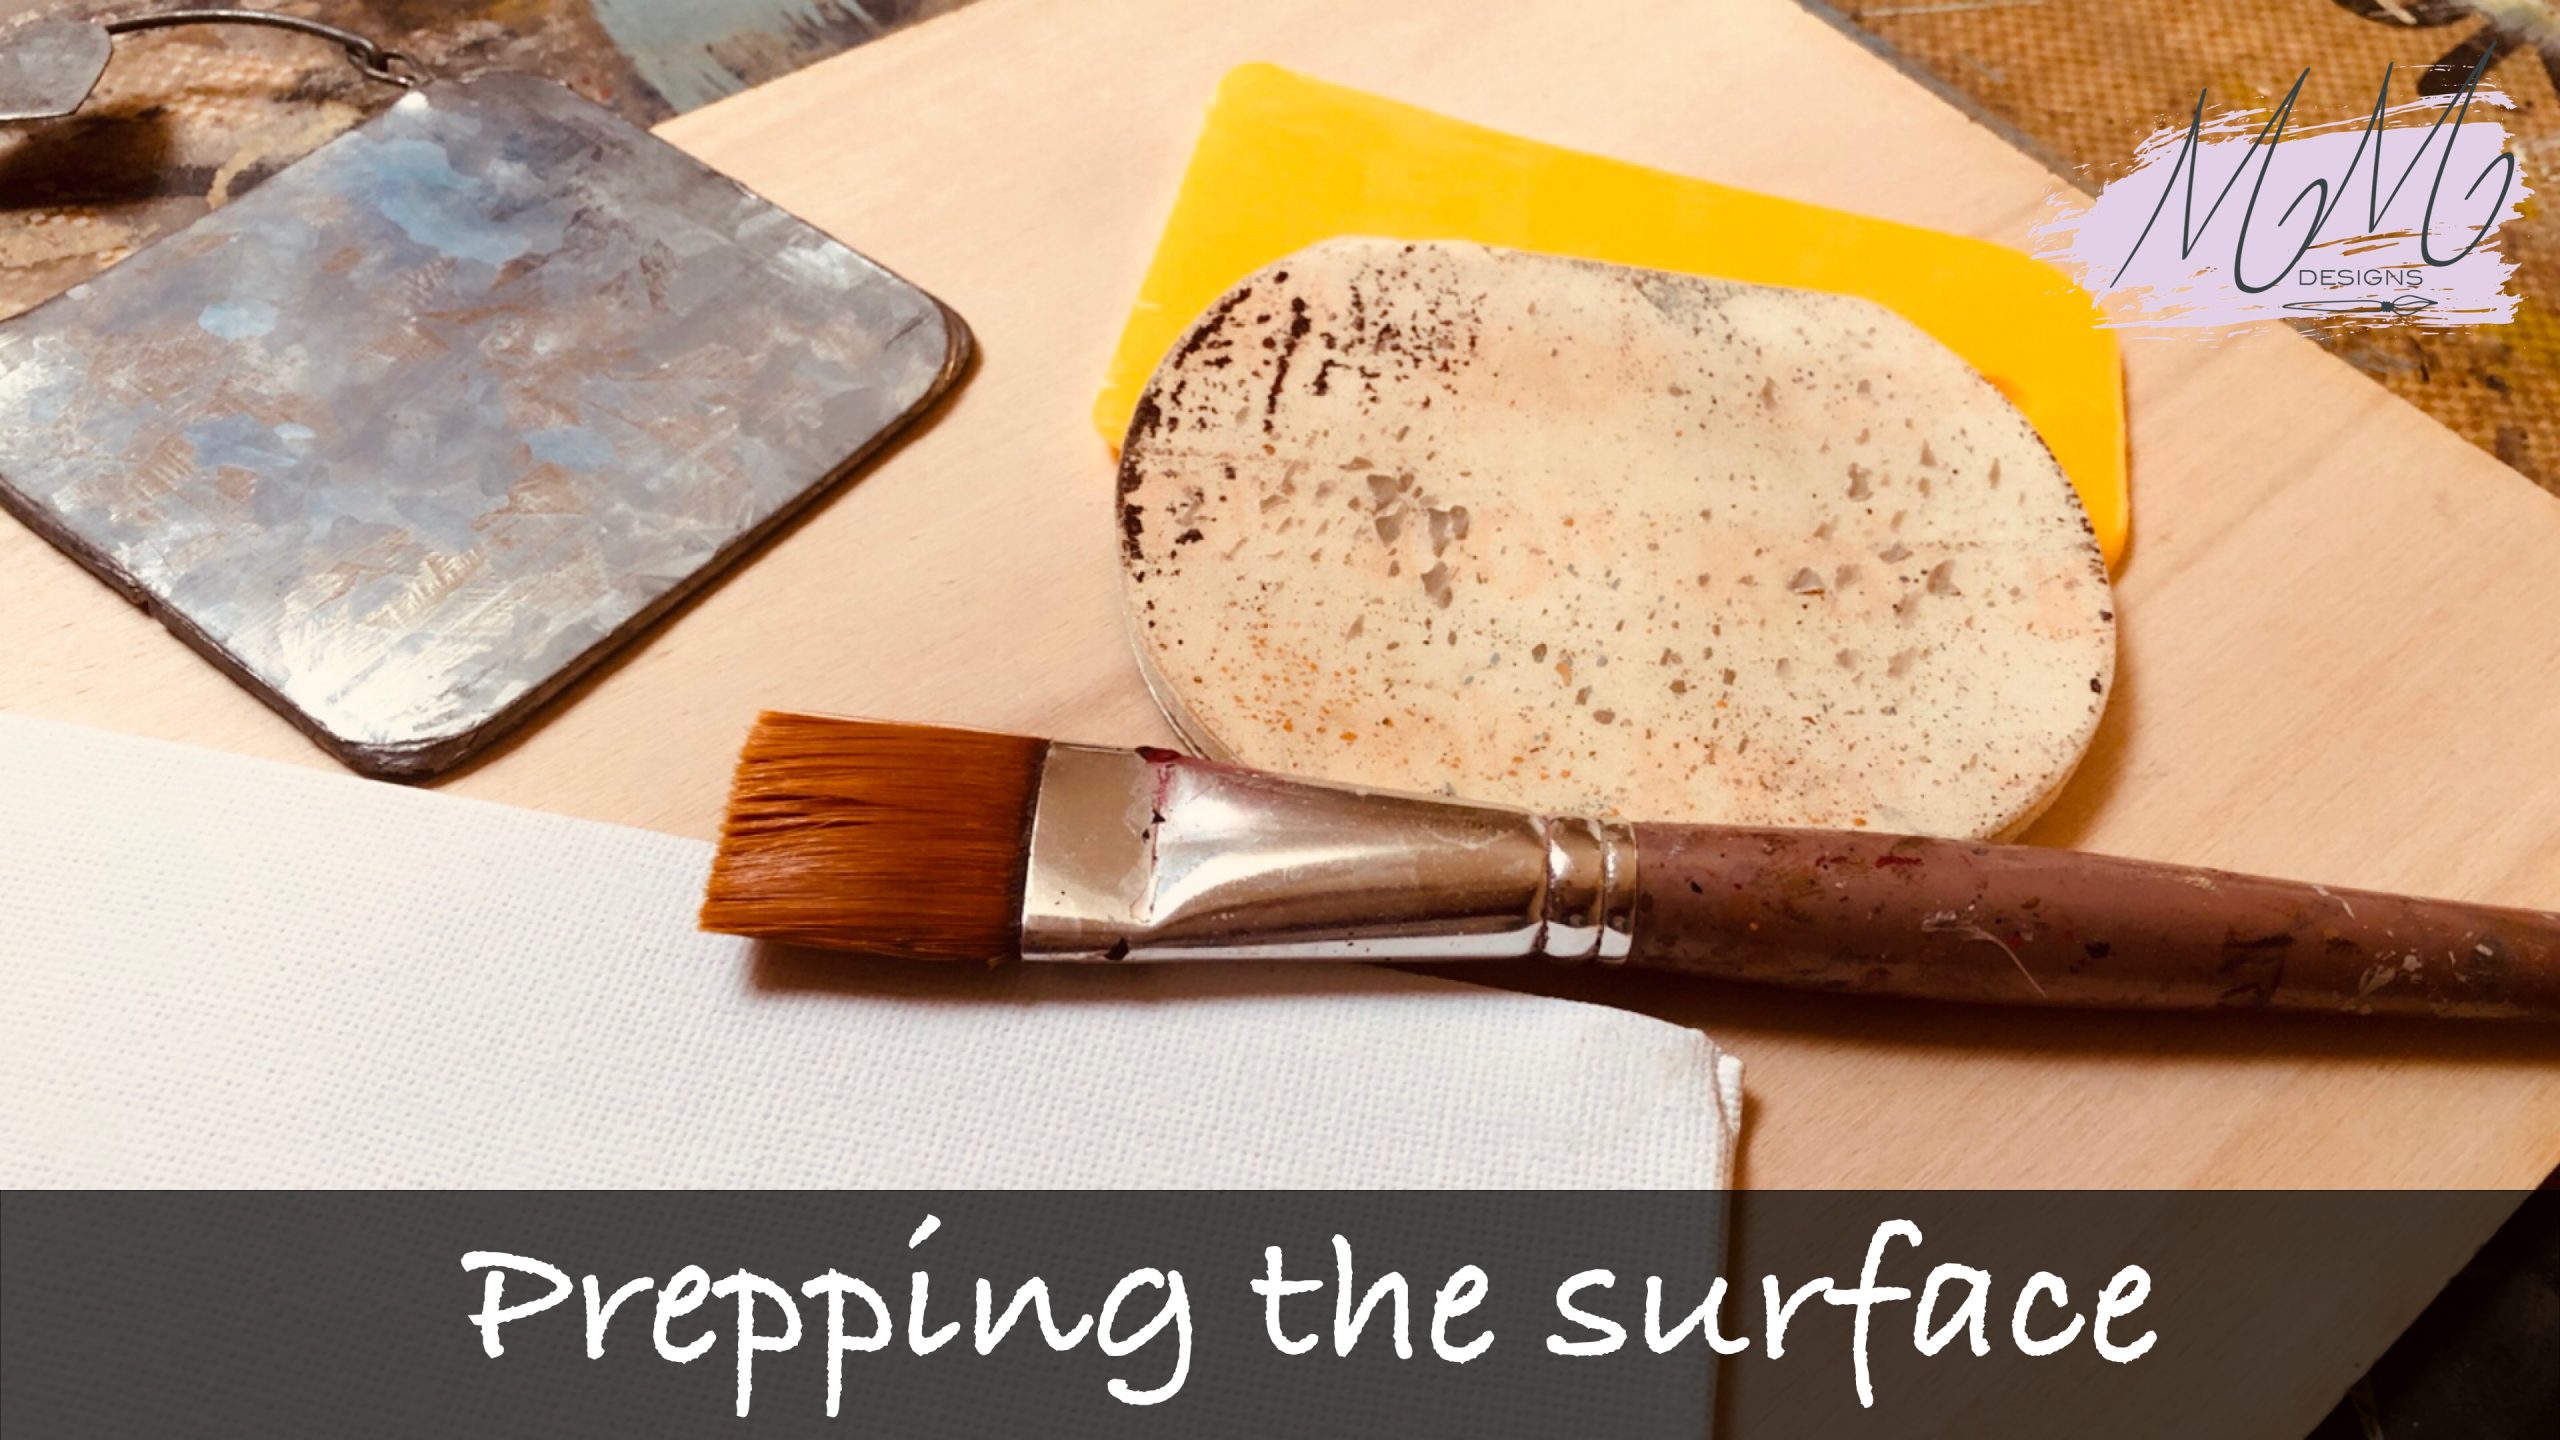 Decorative Painting Tutorial: how to prep the surface